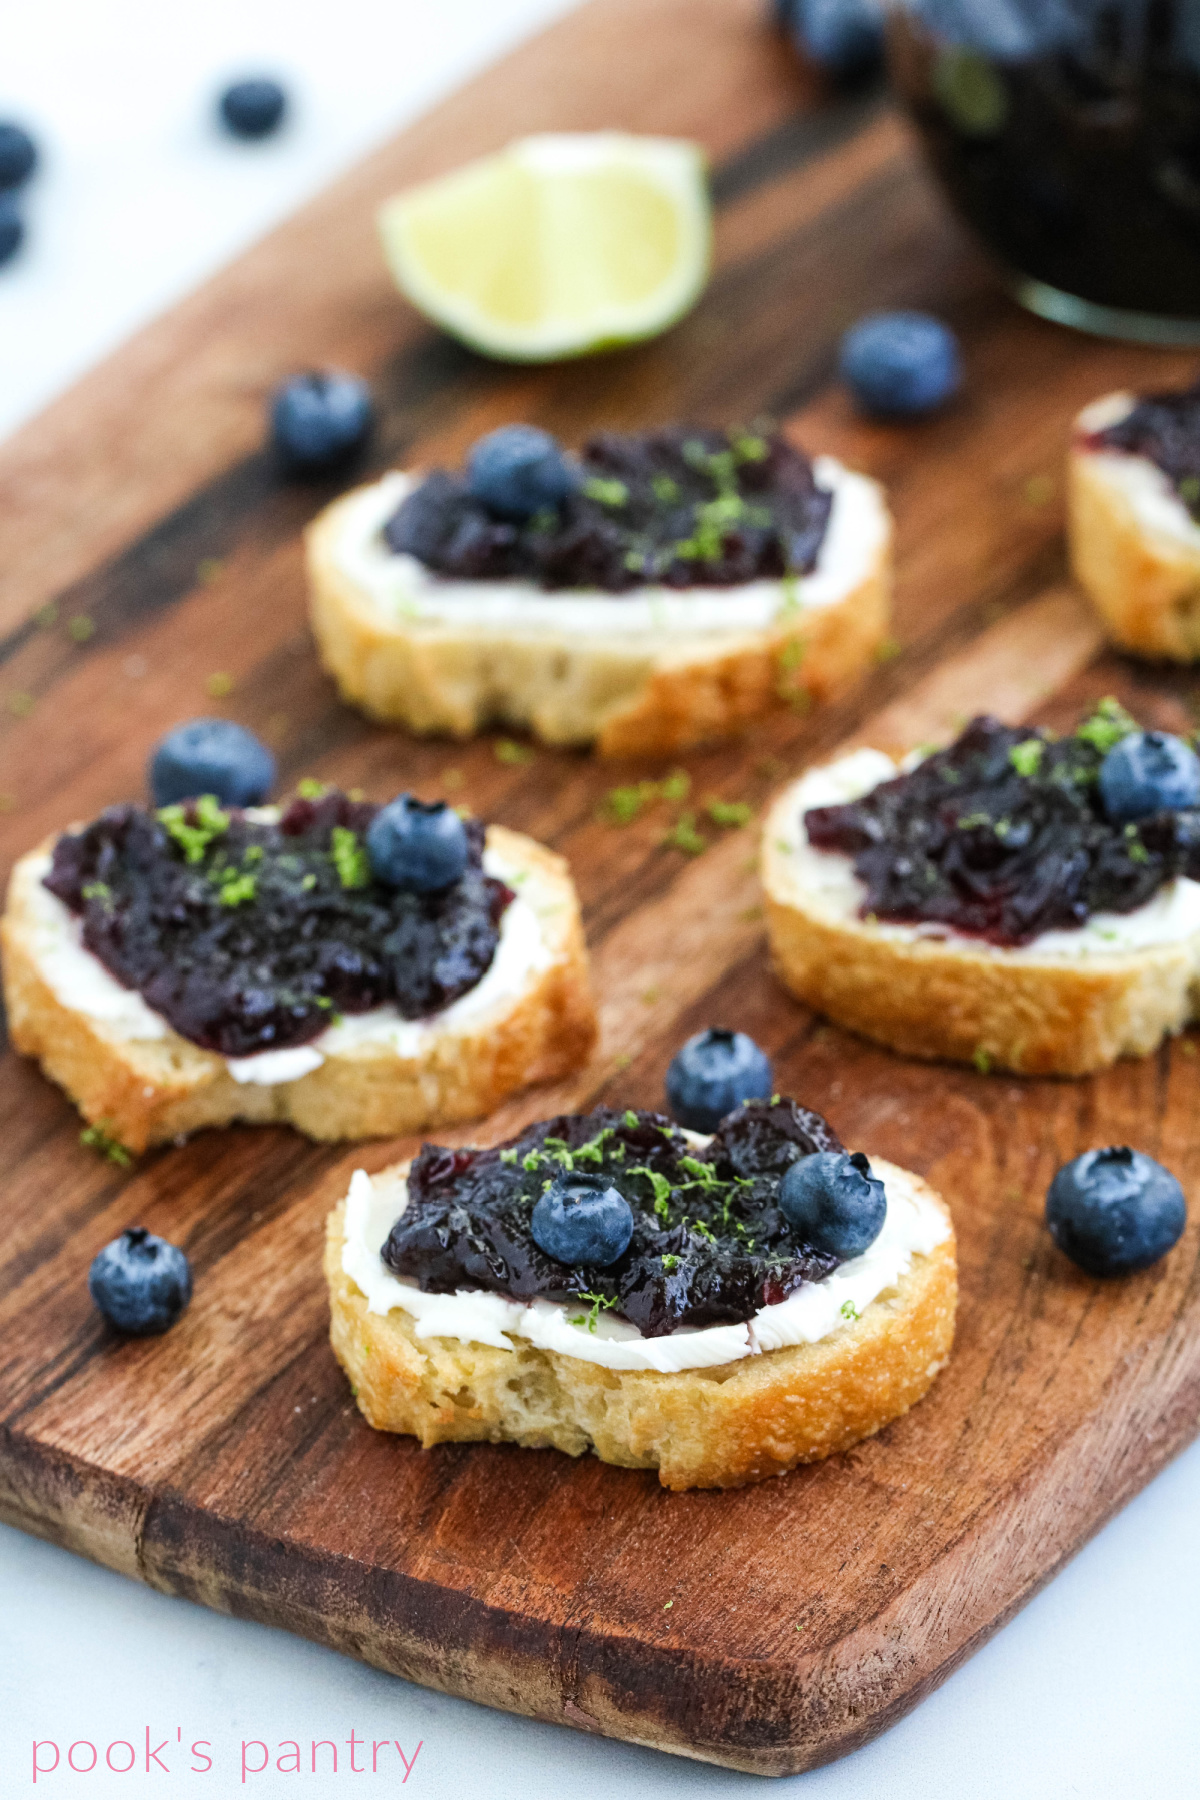 Blueberry lime with jam on crostini.